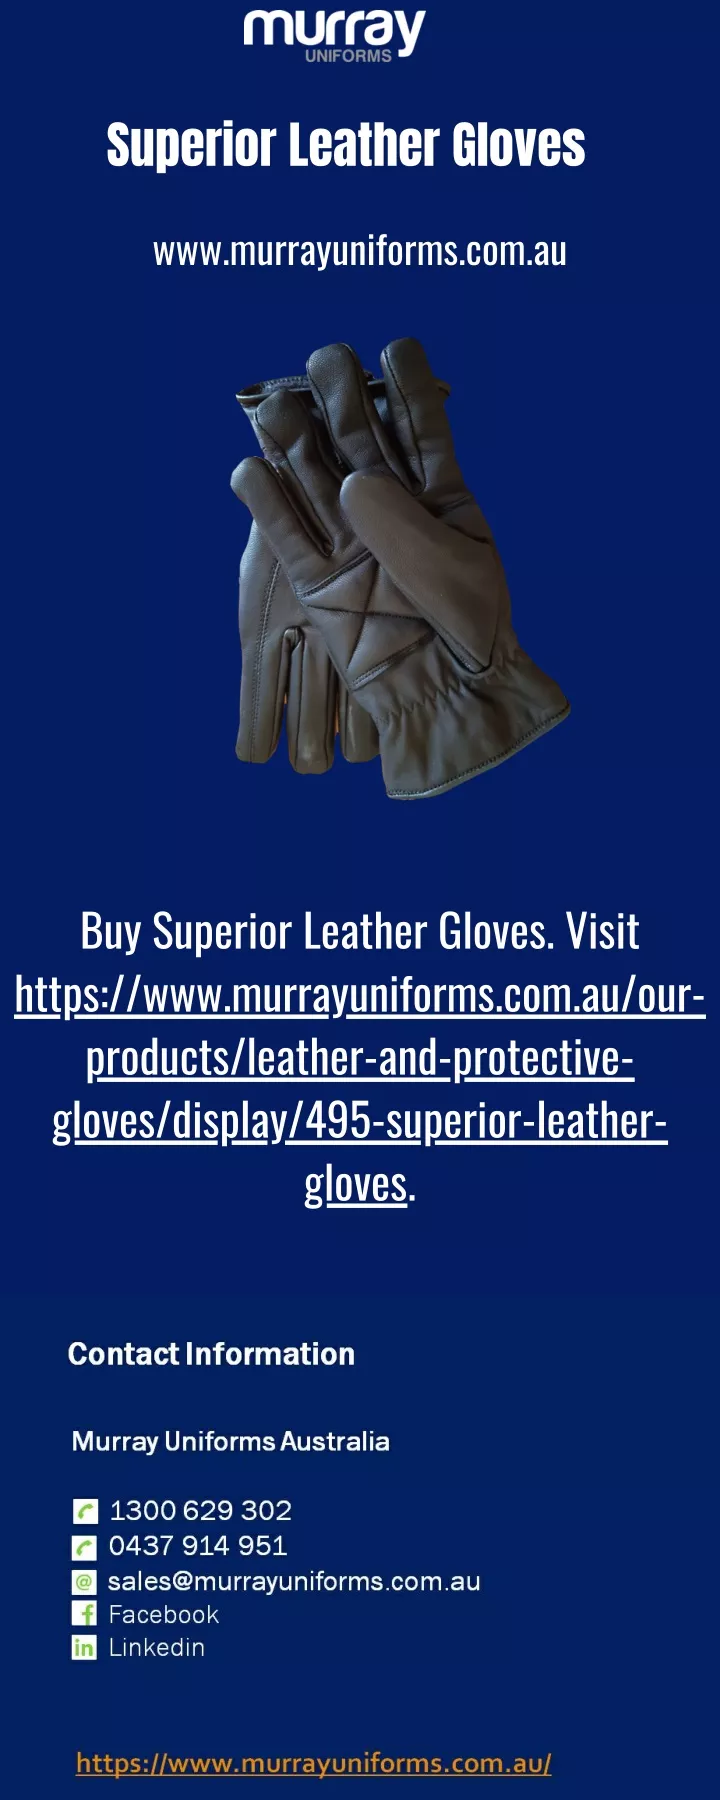 superior leather gloves